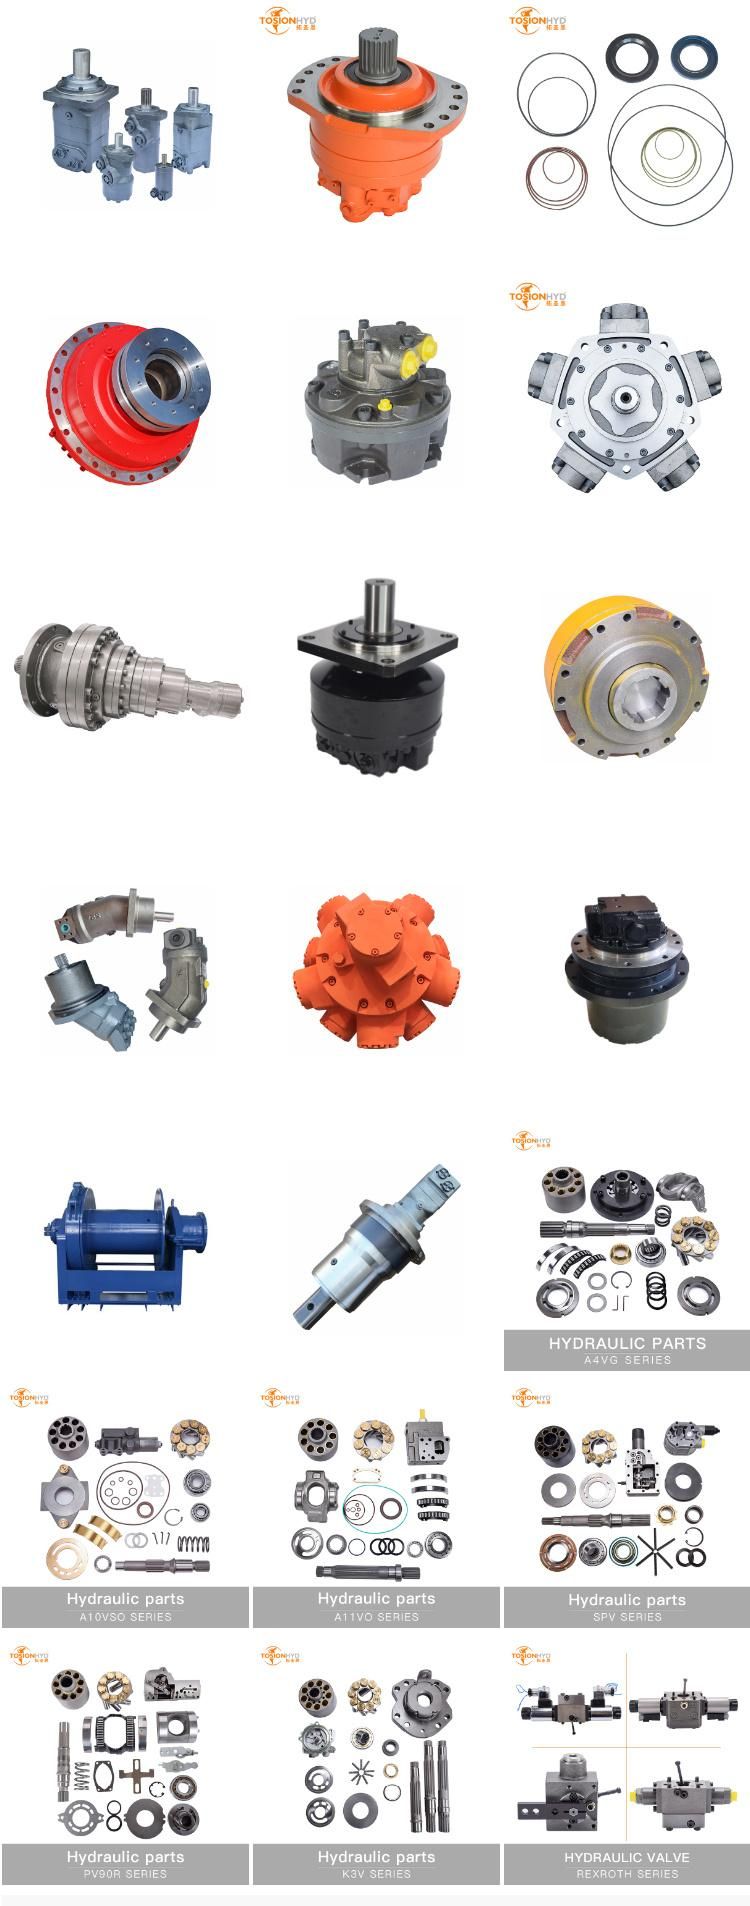 Psvd Hydraulic Pump Parts with Toshiba Spare Repair Kit Parts